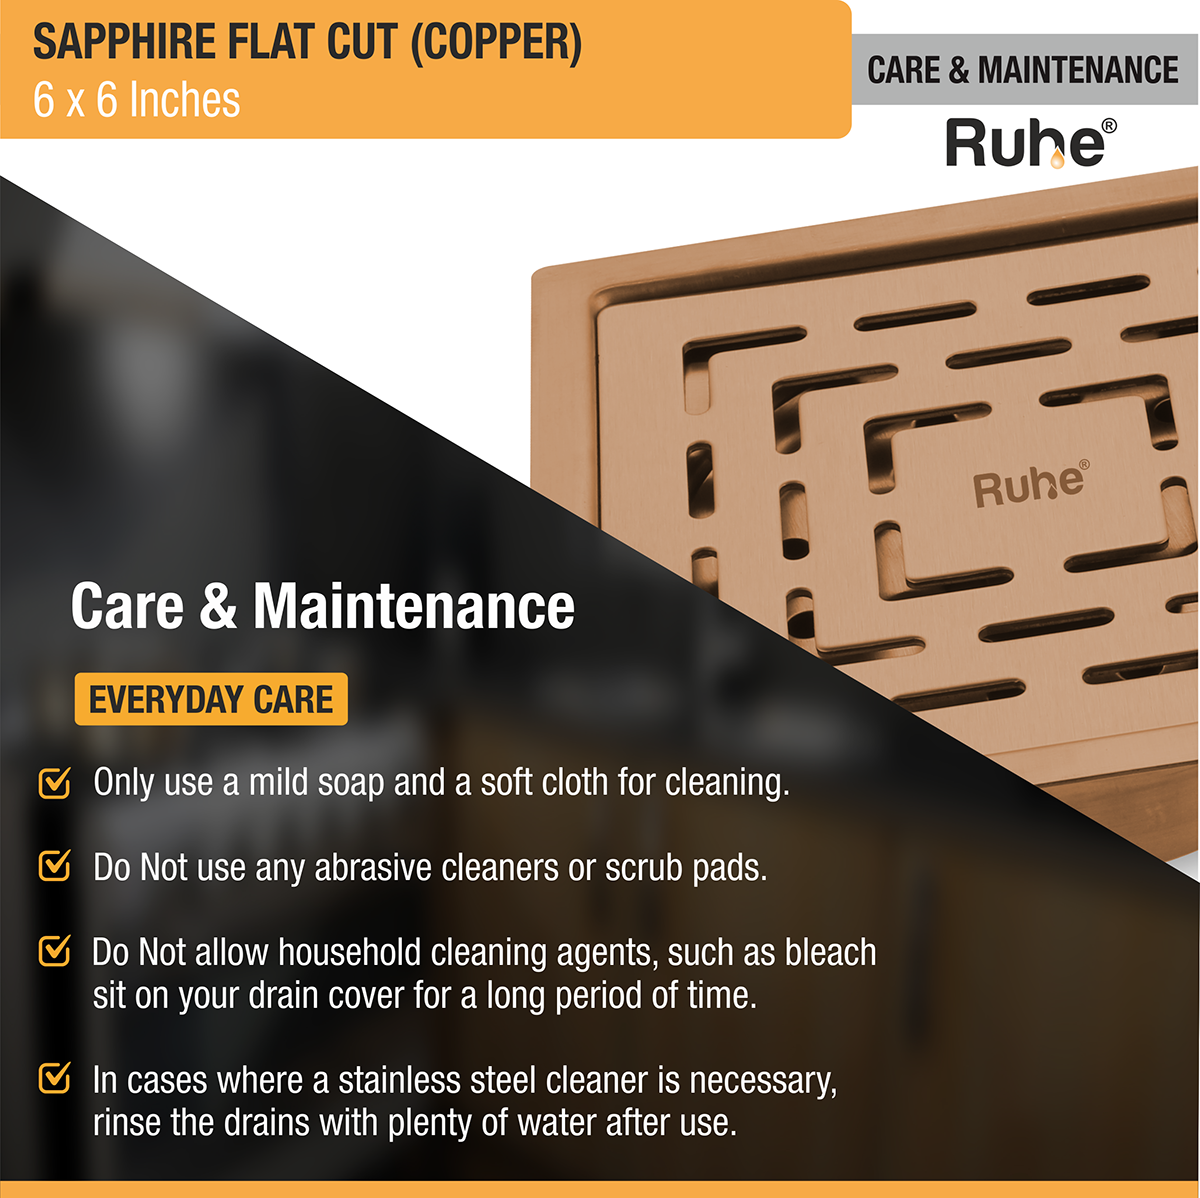 Sapphire Square Flat Cut Floor Drain in Antique Copper PVD Coating (6 x 6 Inches) care and maintenance